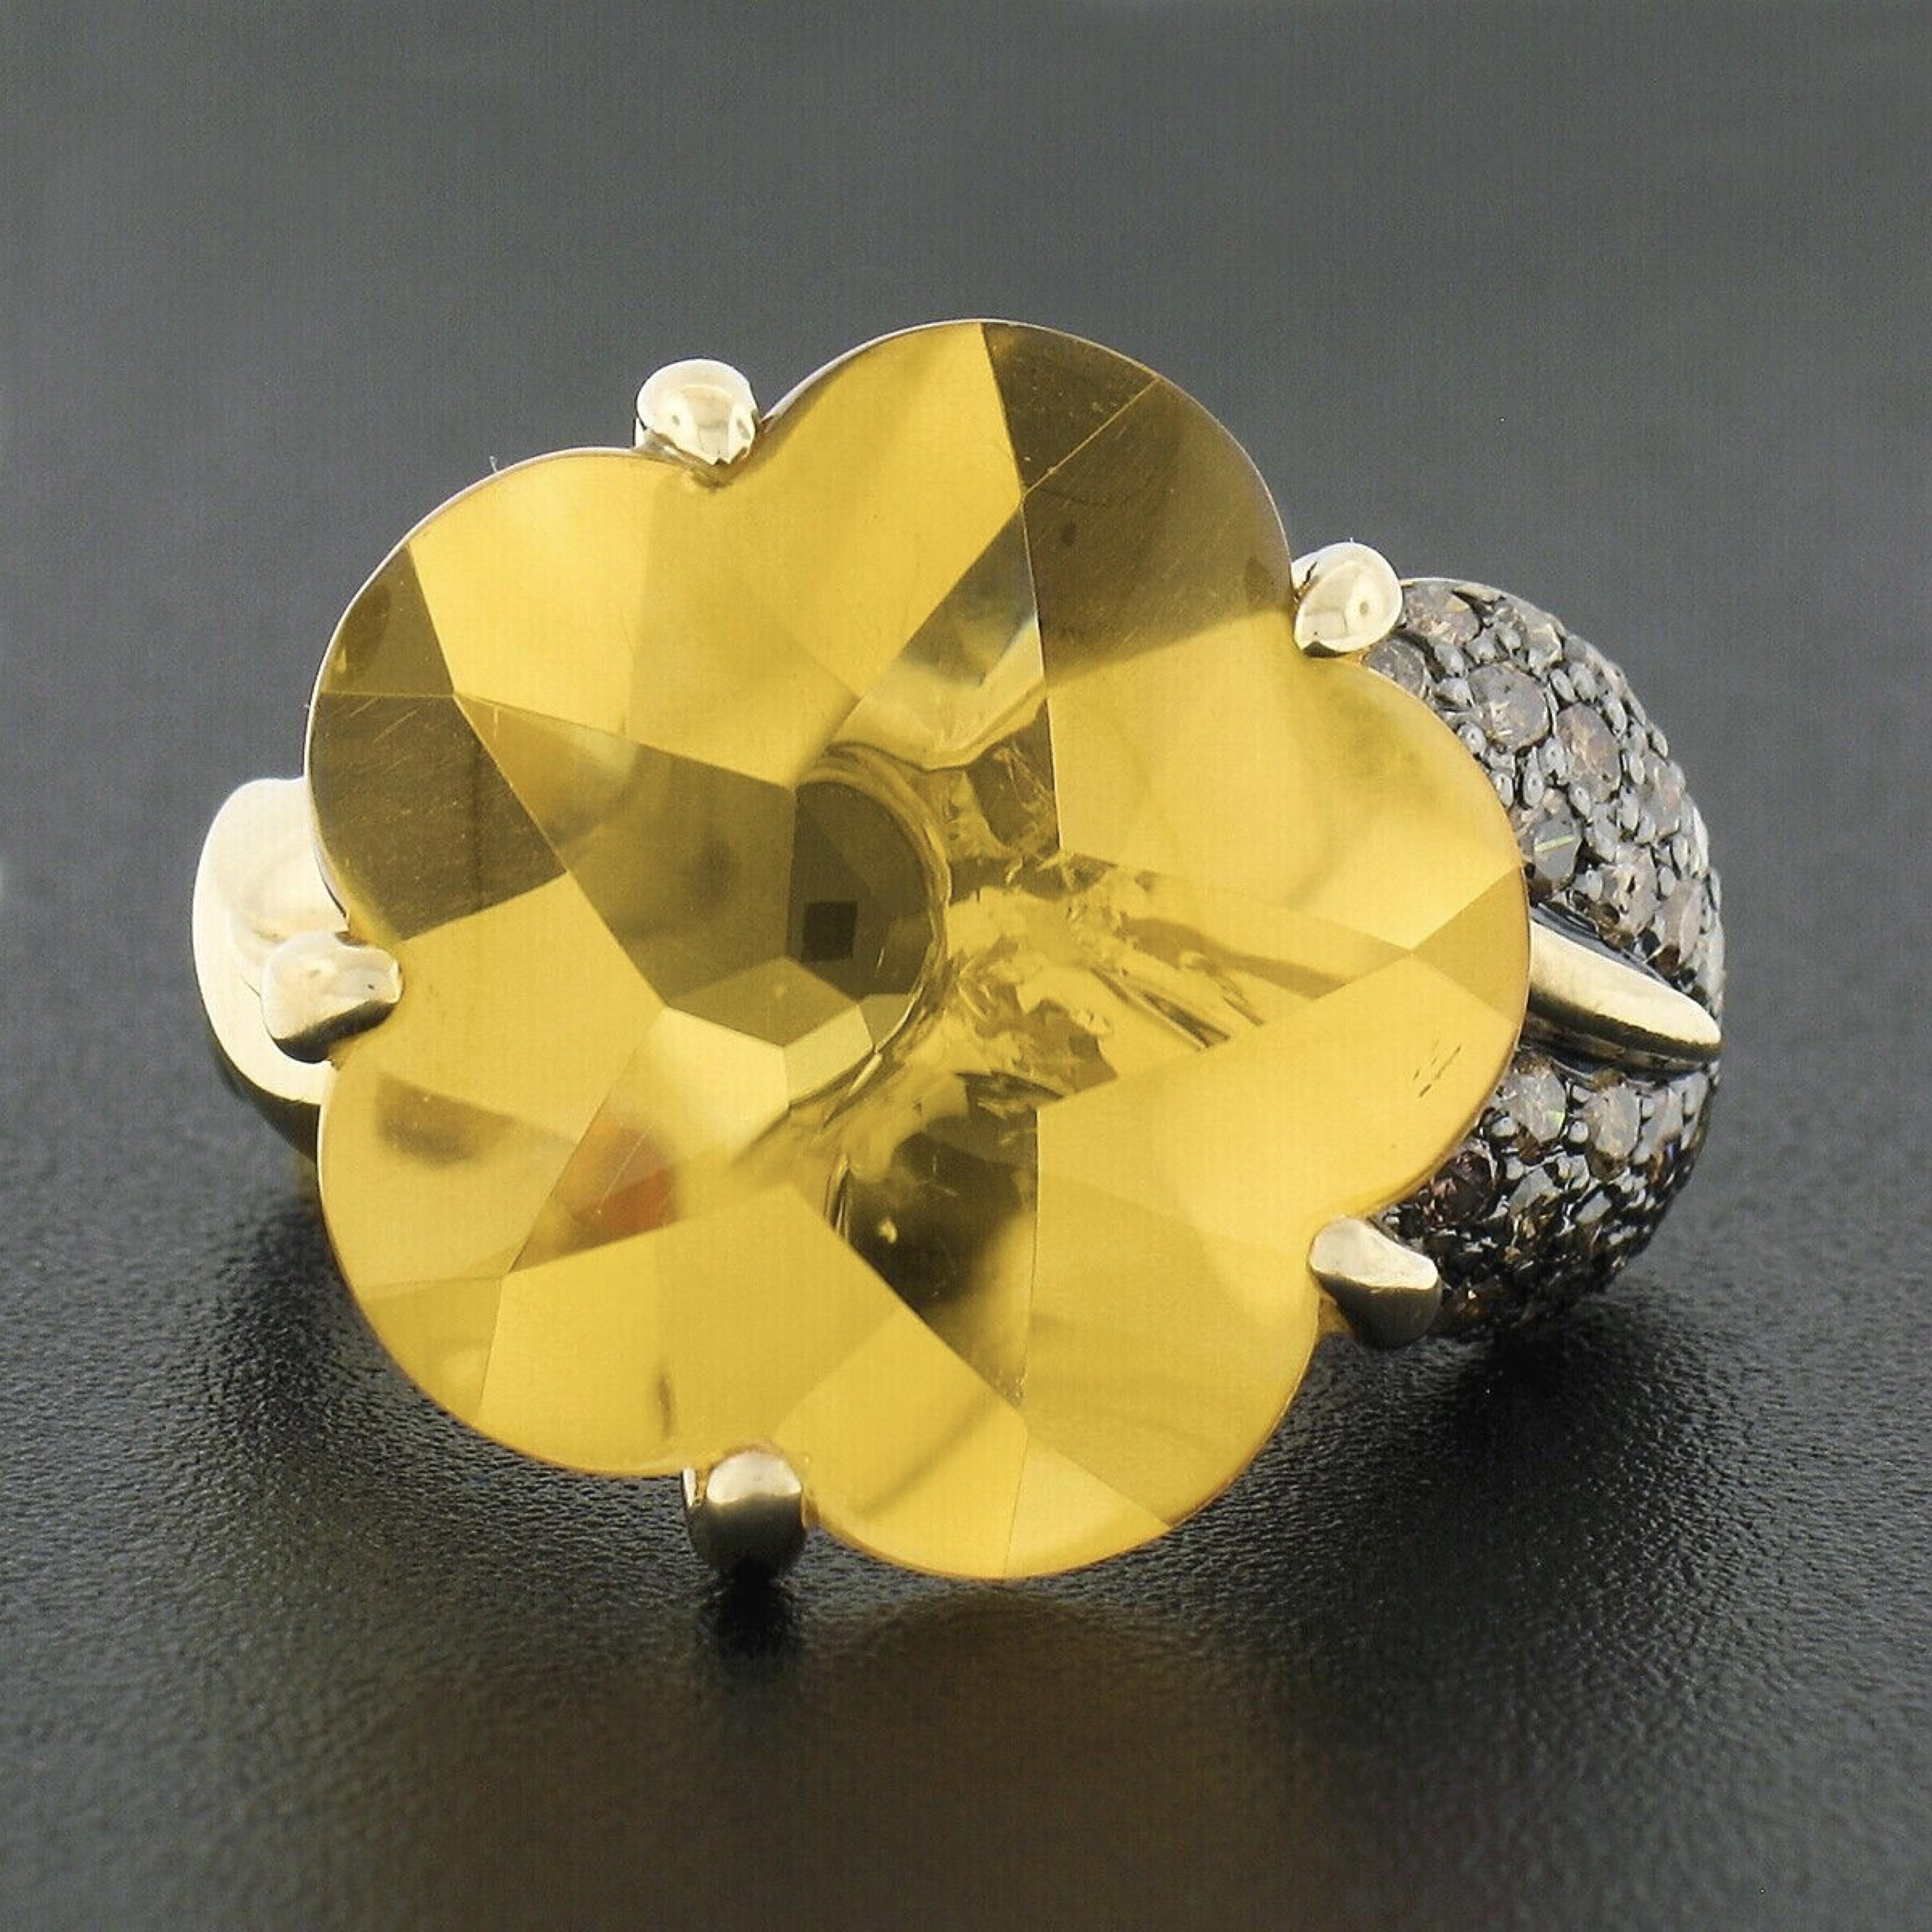 Here we have a fancy and absolutely magnificent cocktail ring that is crafted from solid 18k yellow gold featuring a beautiful flower and leaf design set with a very fine quality citrine and fancy brown diamonds throughout. The large and chunky